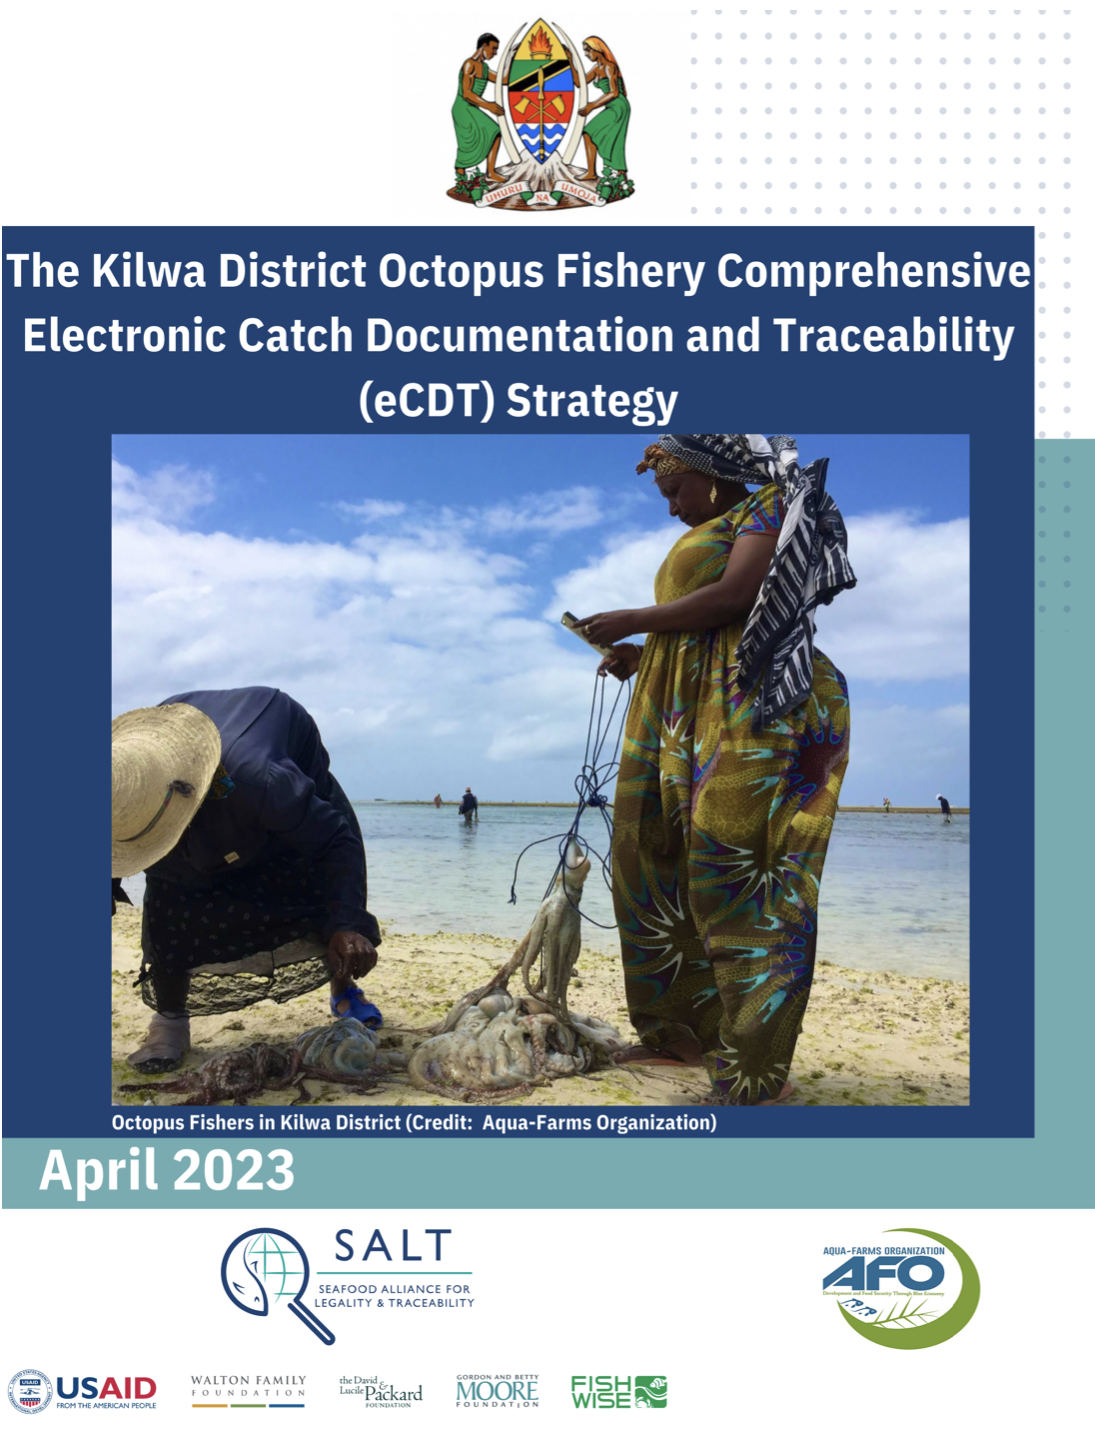 Cover page with SALT, AFO, and MLF logo. Two women octopus fishers on the beach in Kilwa District. Octopus catch is shown on a line and one woman is holding a smart phone while the other is leaning over looking at the catch.